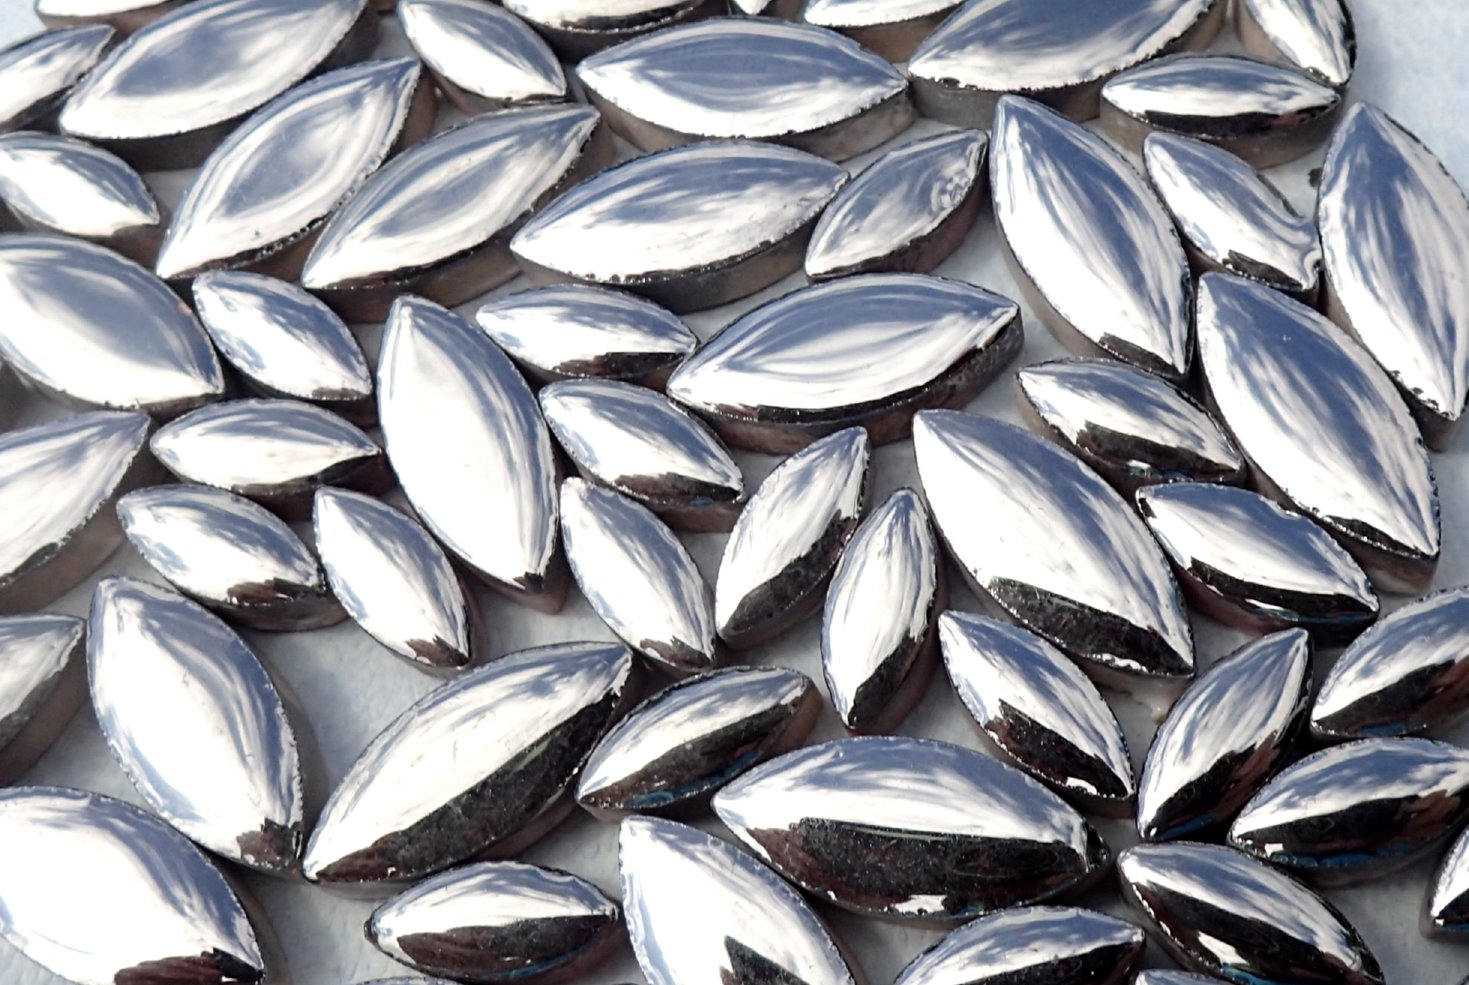 Shiny Silver Petals Mosaic Tiles - 50g Ceramic Metallic Leaves in Mix of 2 Sizes 1/2" and 3/4"